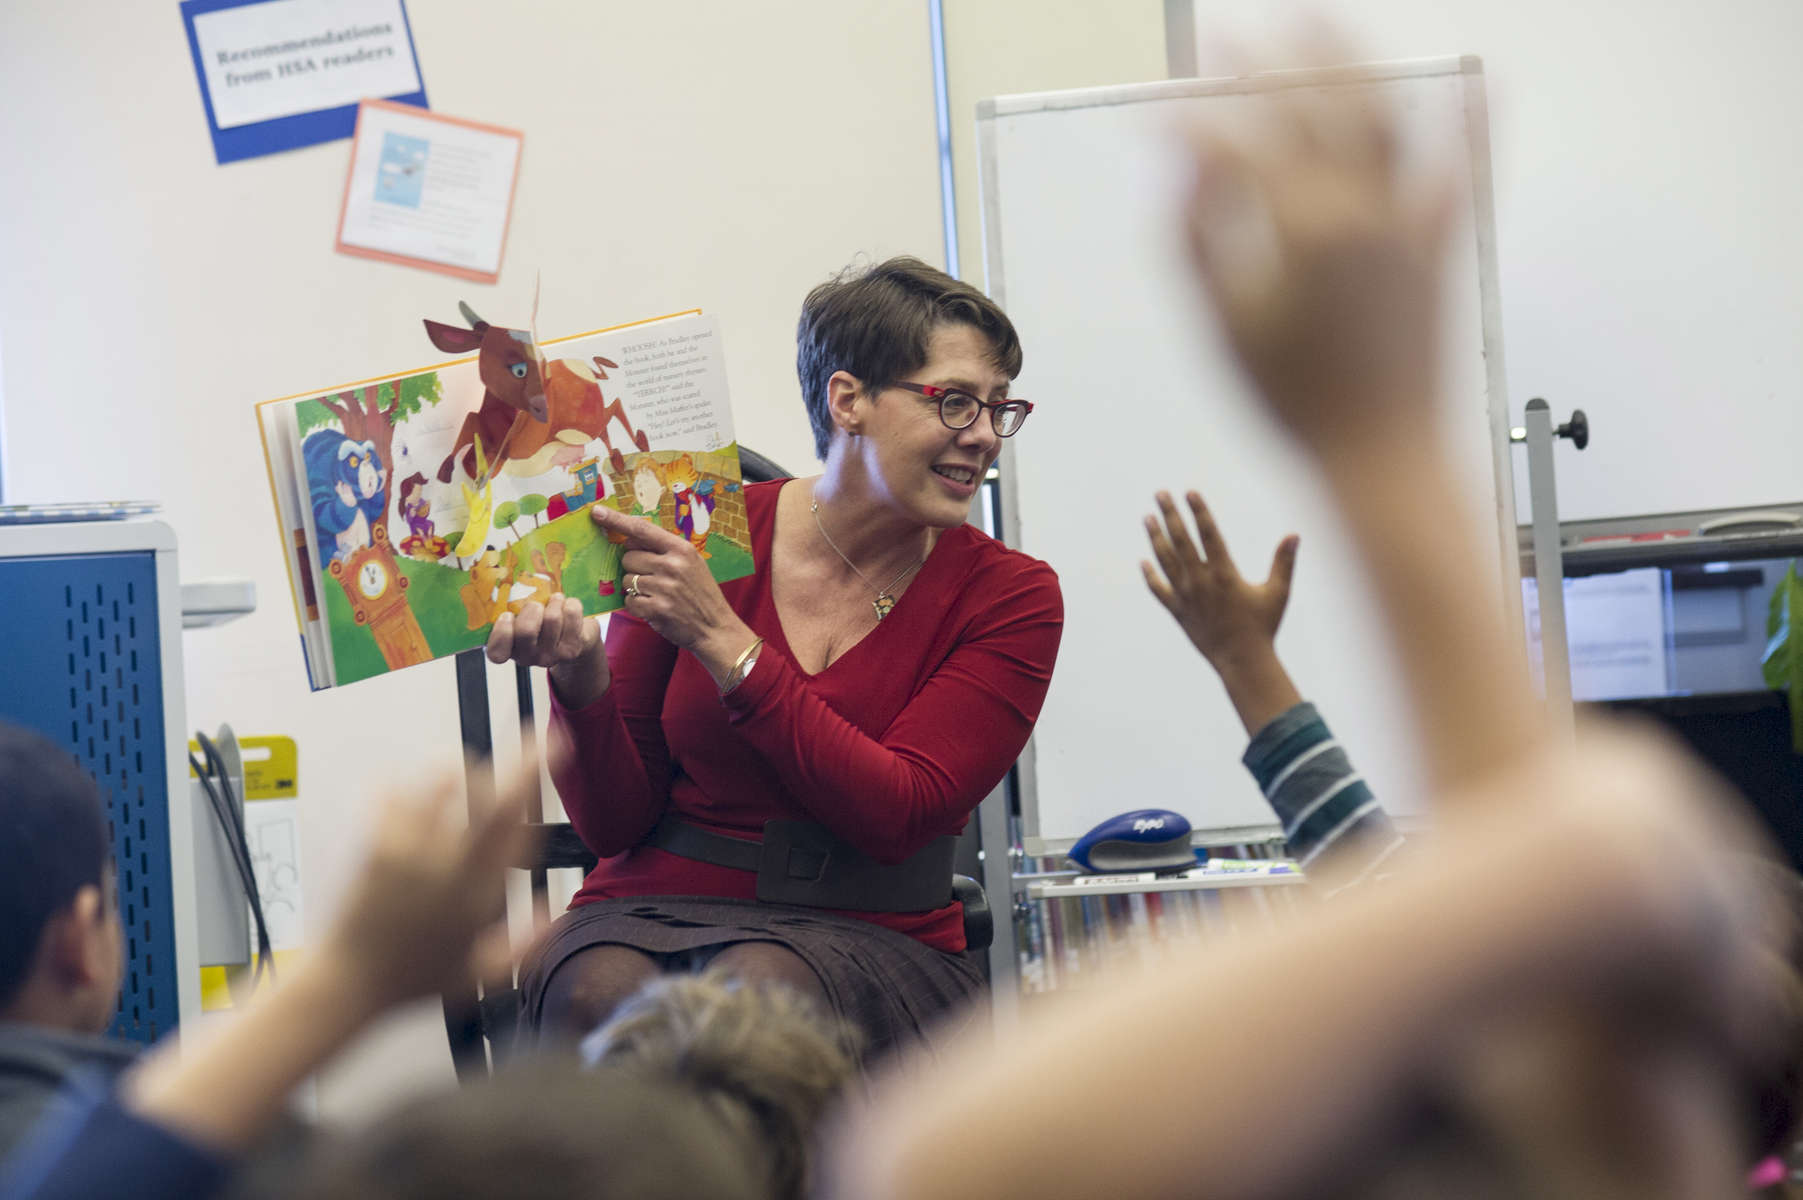 Librarian Lies Garner asks a group of first grade students if they recognize any characters or scenes from nursery rhymes in the book she is reading during their homeroom's library class at Hawthorne Scholastic Academy in Chicago's Lakeview neighborhood, November 10 2016.